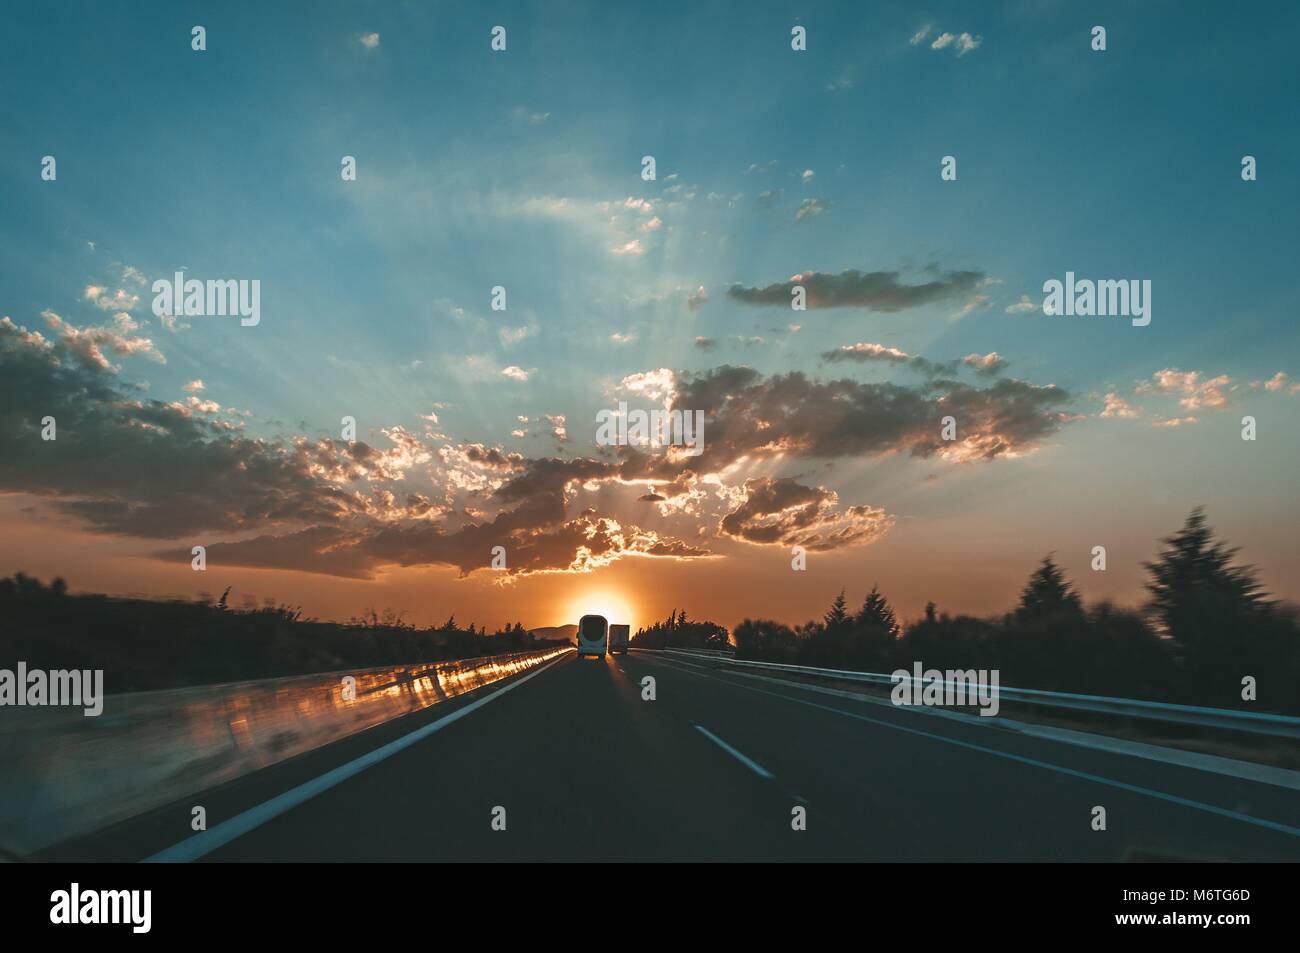 Colorful sunset over at highway. Landscape with orange sunset over highway. Cloud layers with sunrays between them. Contre-jour silhouette of cars. Stock Photo